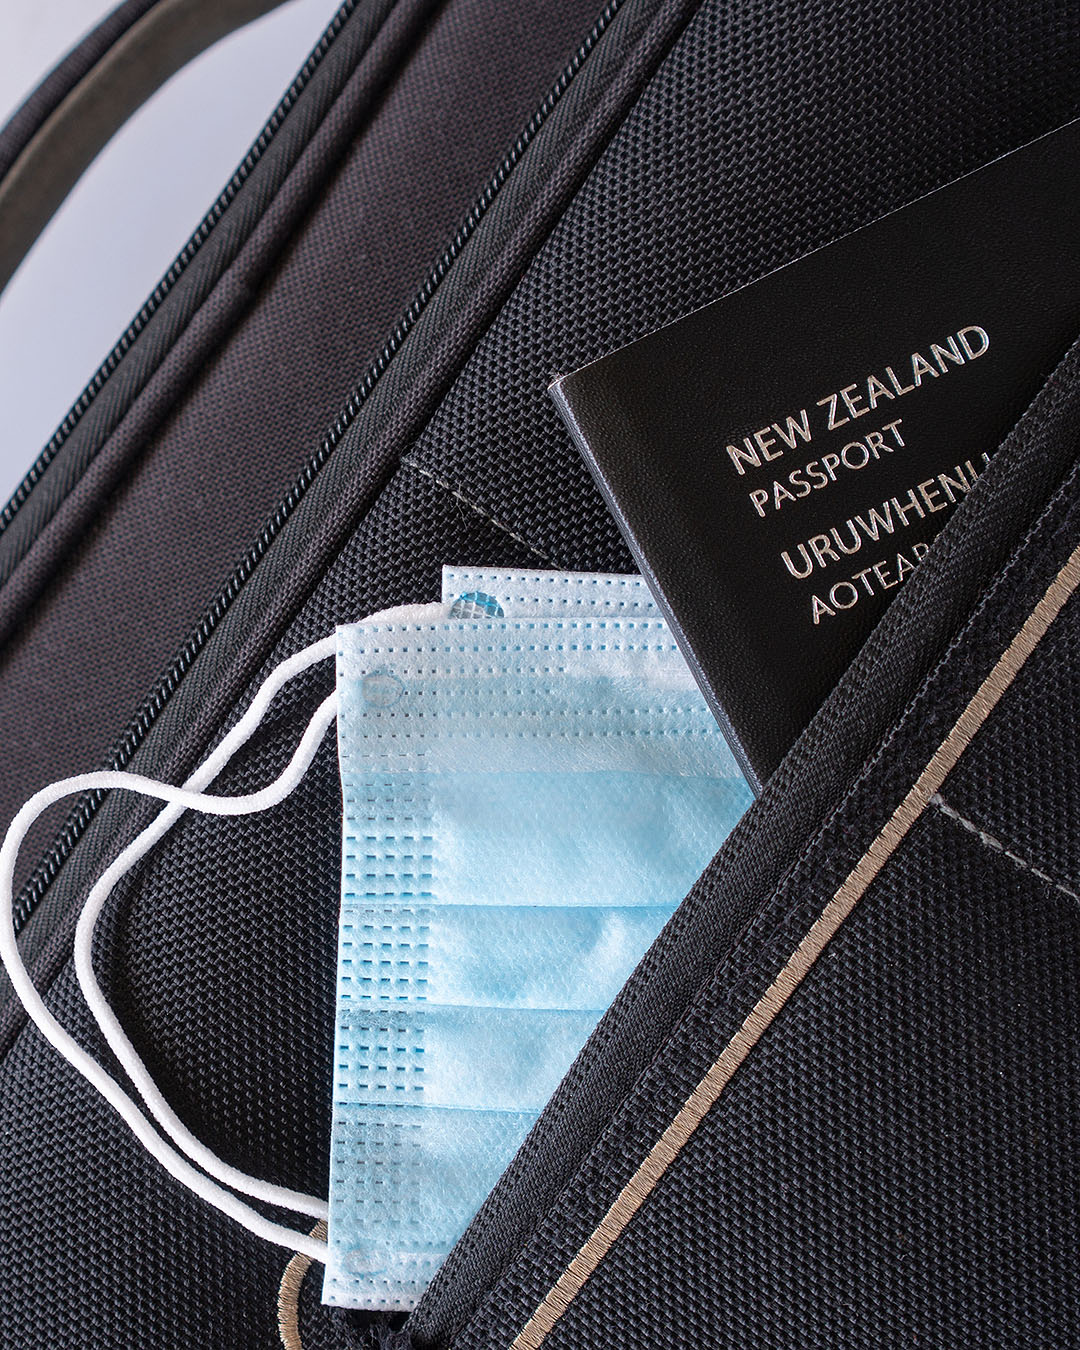 A NZ passport with masks peeking out of luggage.